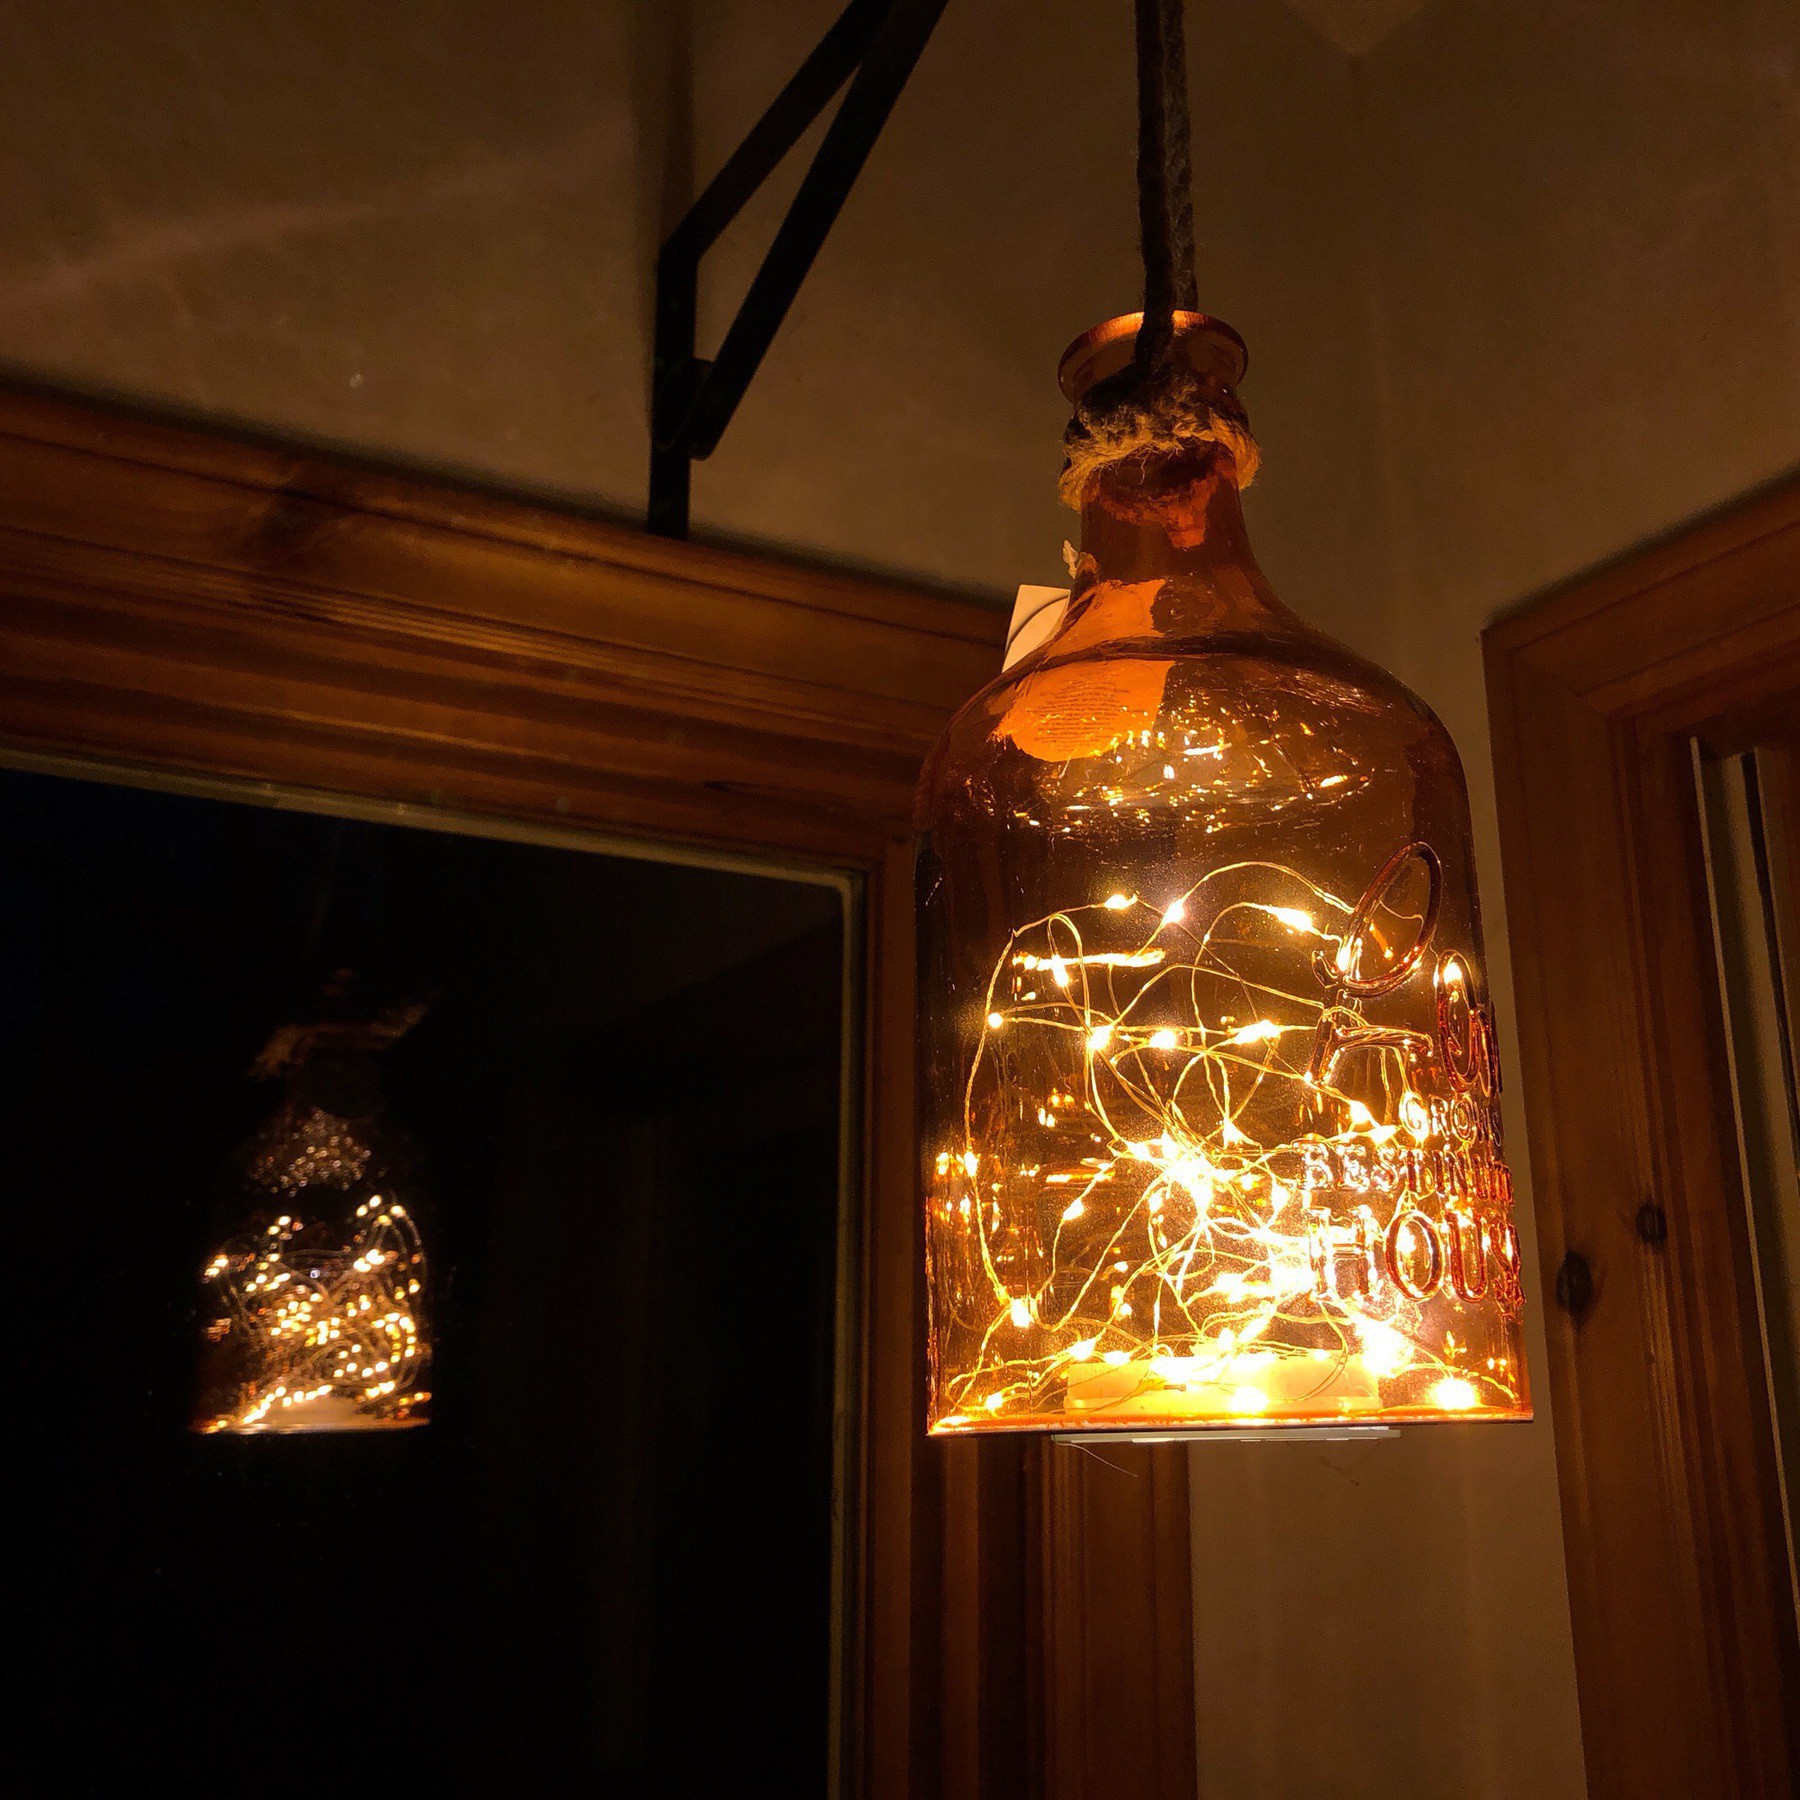 LED ights in bottle hanging from hook.